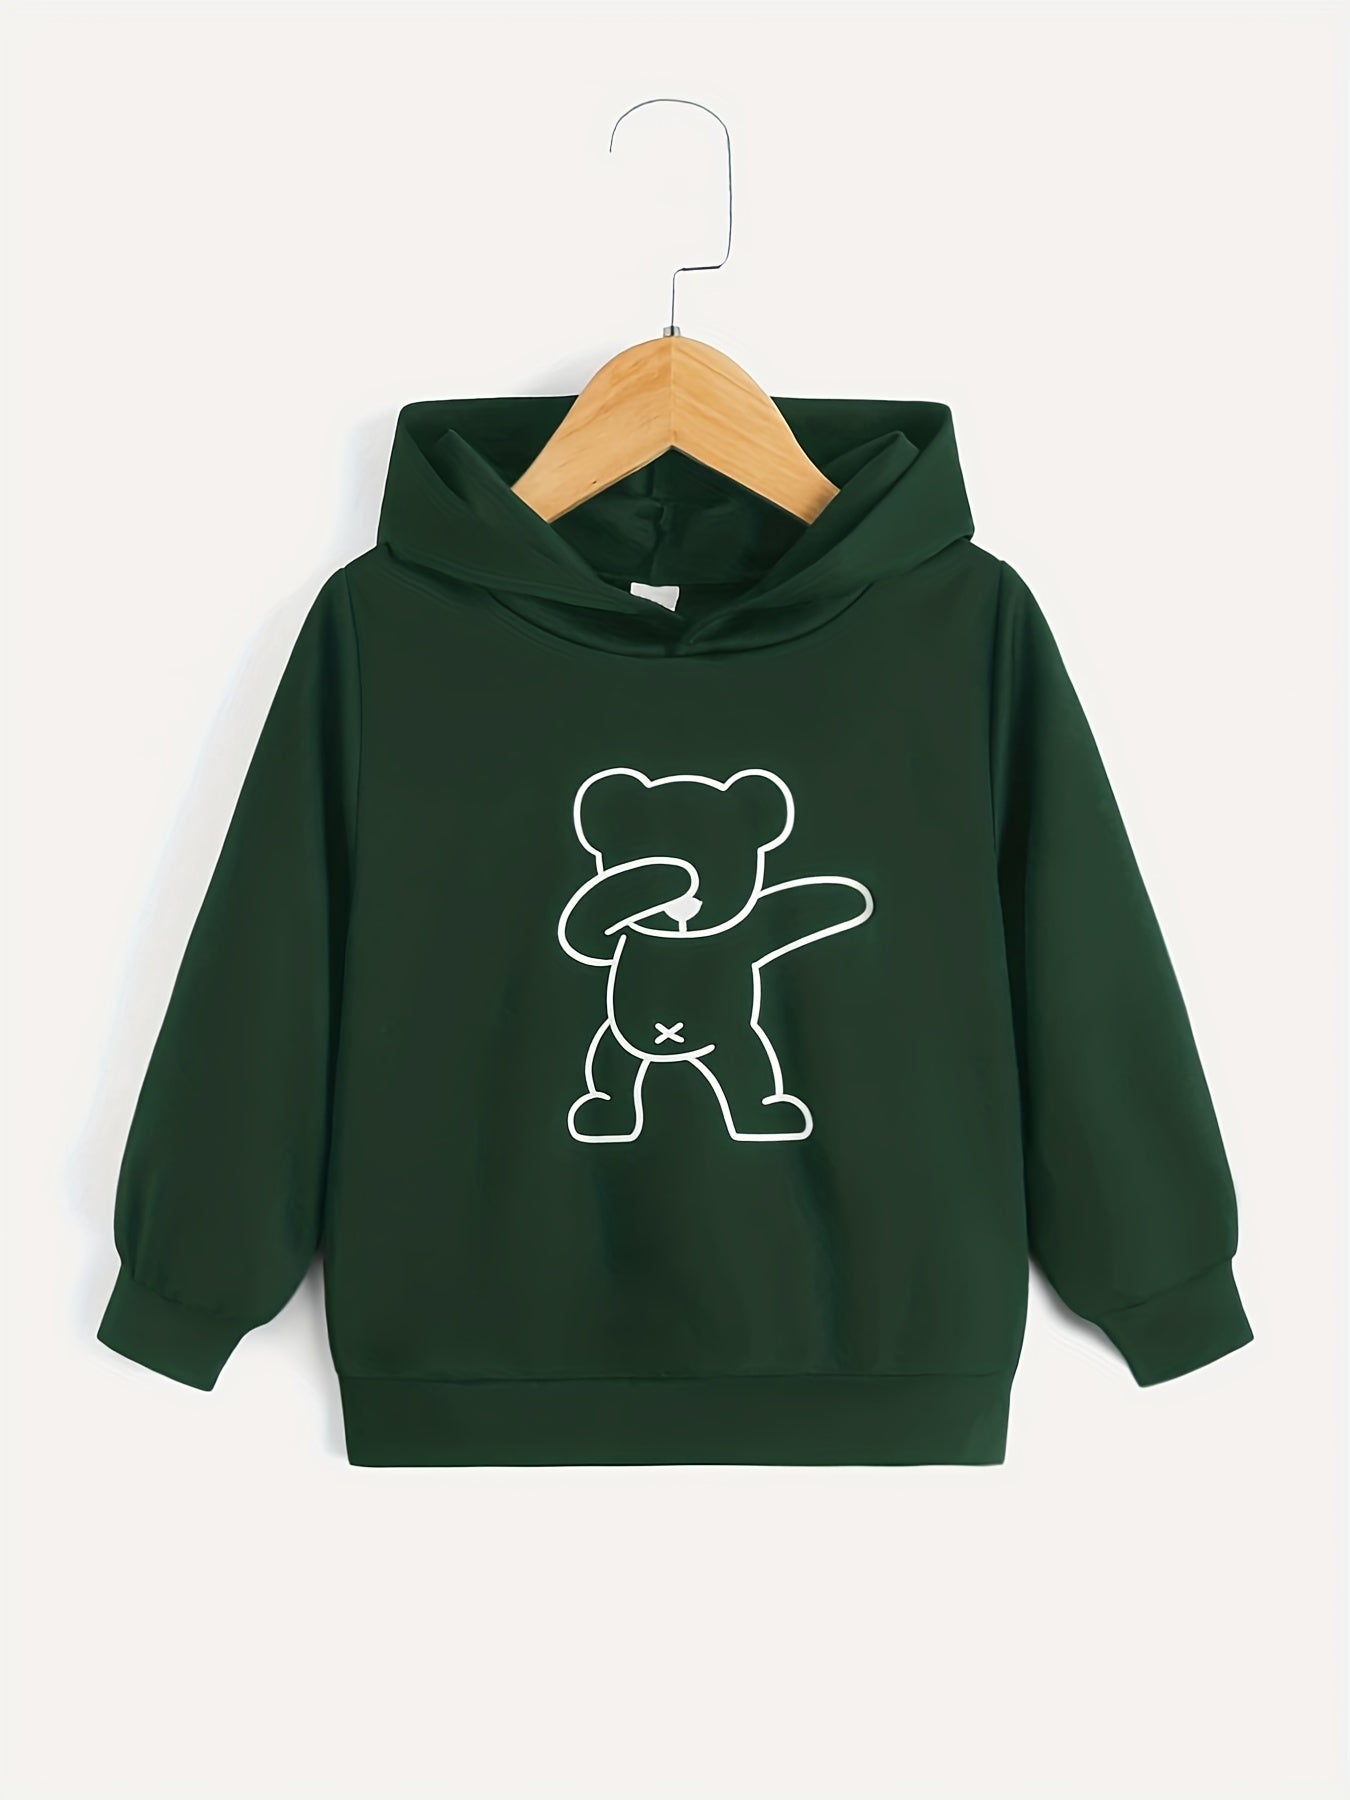 Cool Bear Print Boys Casual Pullover Hooded Long Sleeve Sweatshirt For Spring Fall, Kids Clothing